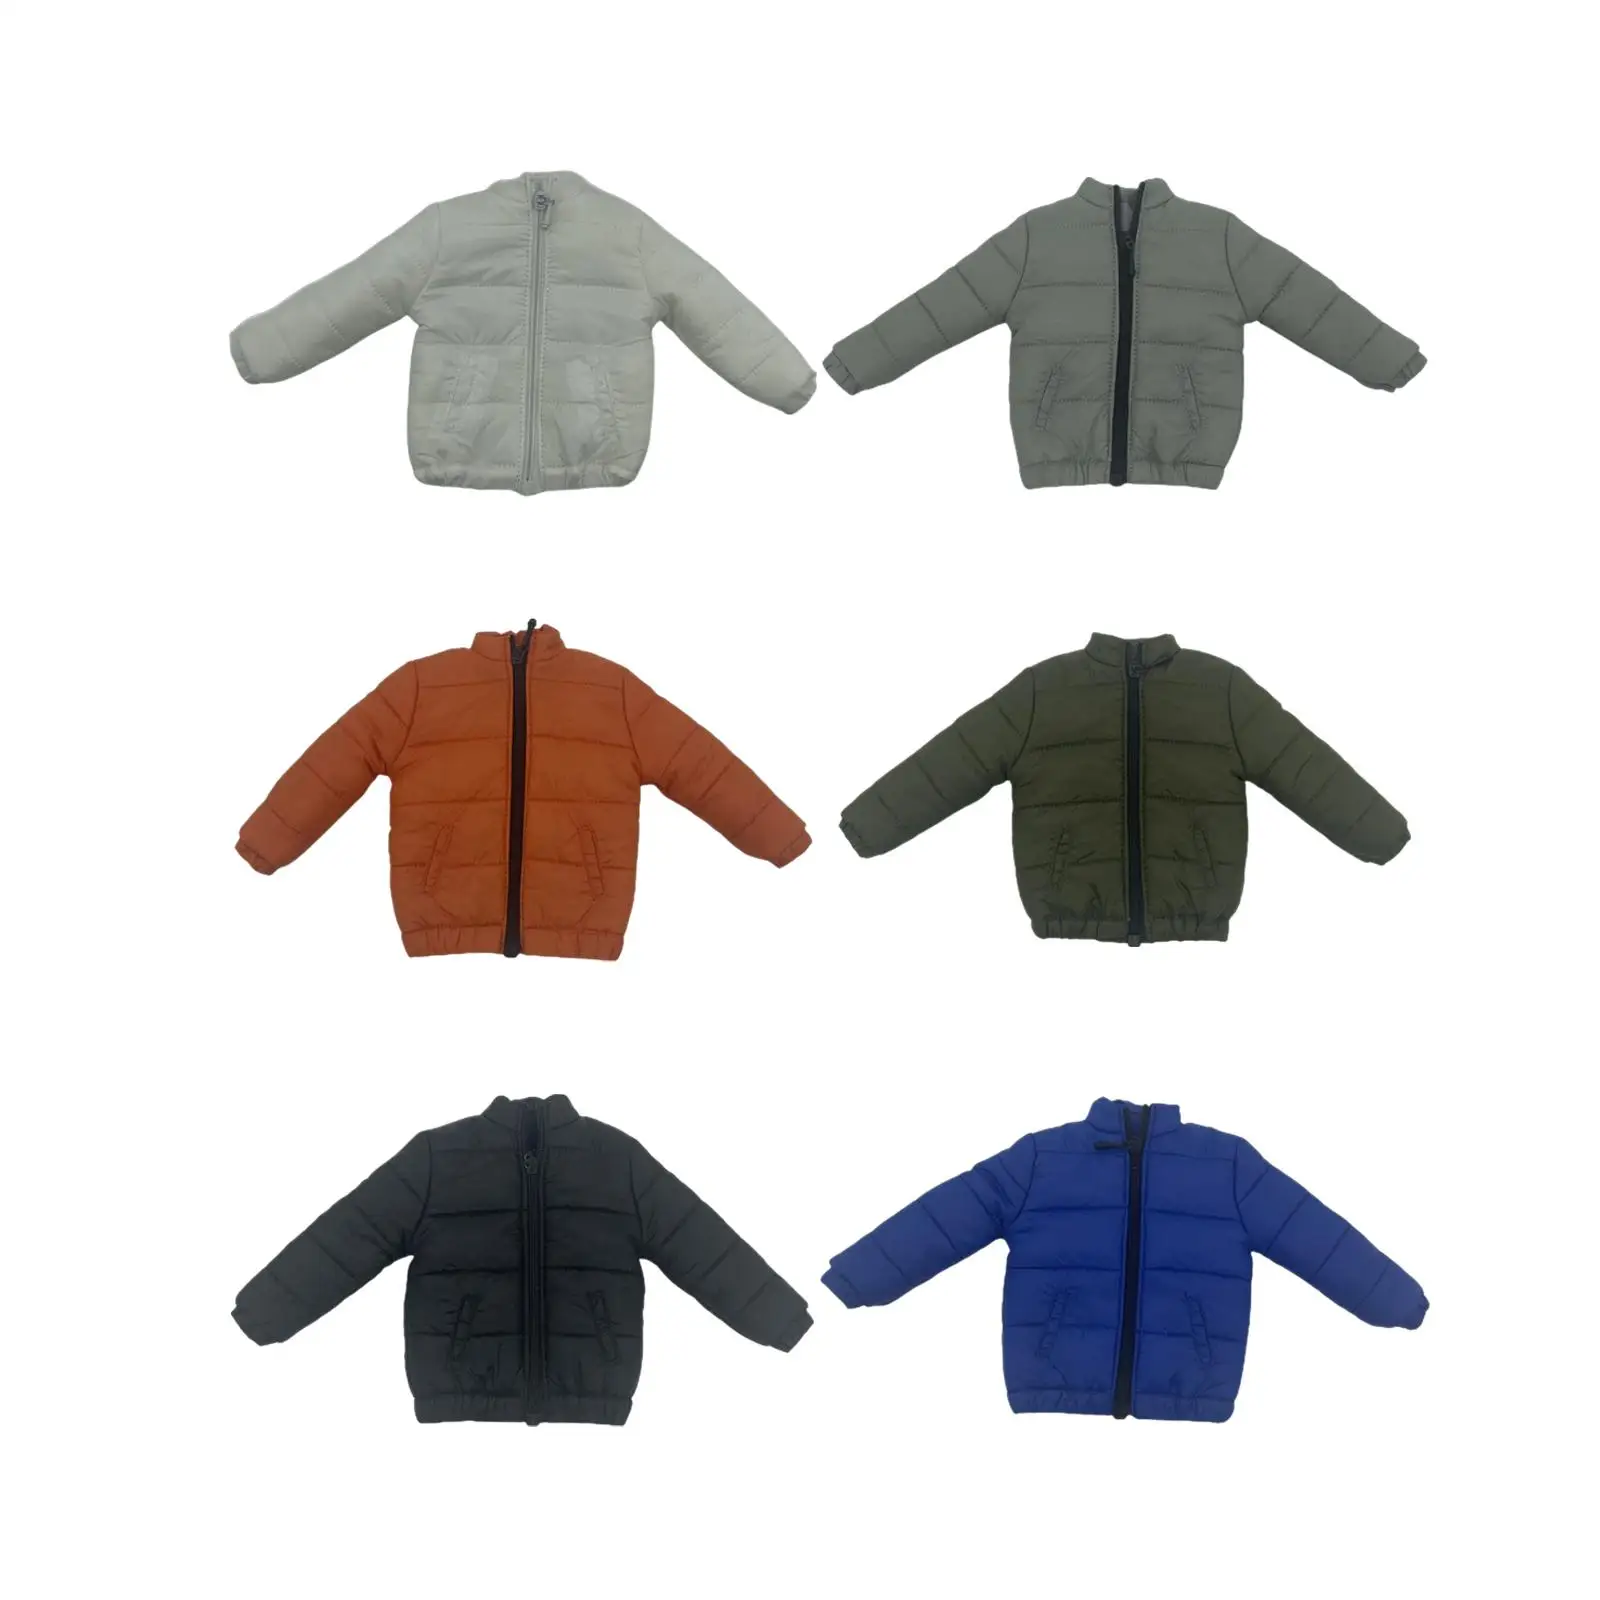 1/6 Scale Doll Down Jacket Costume Accessories for 12inch Men Figures Accs